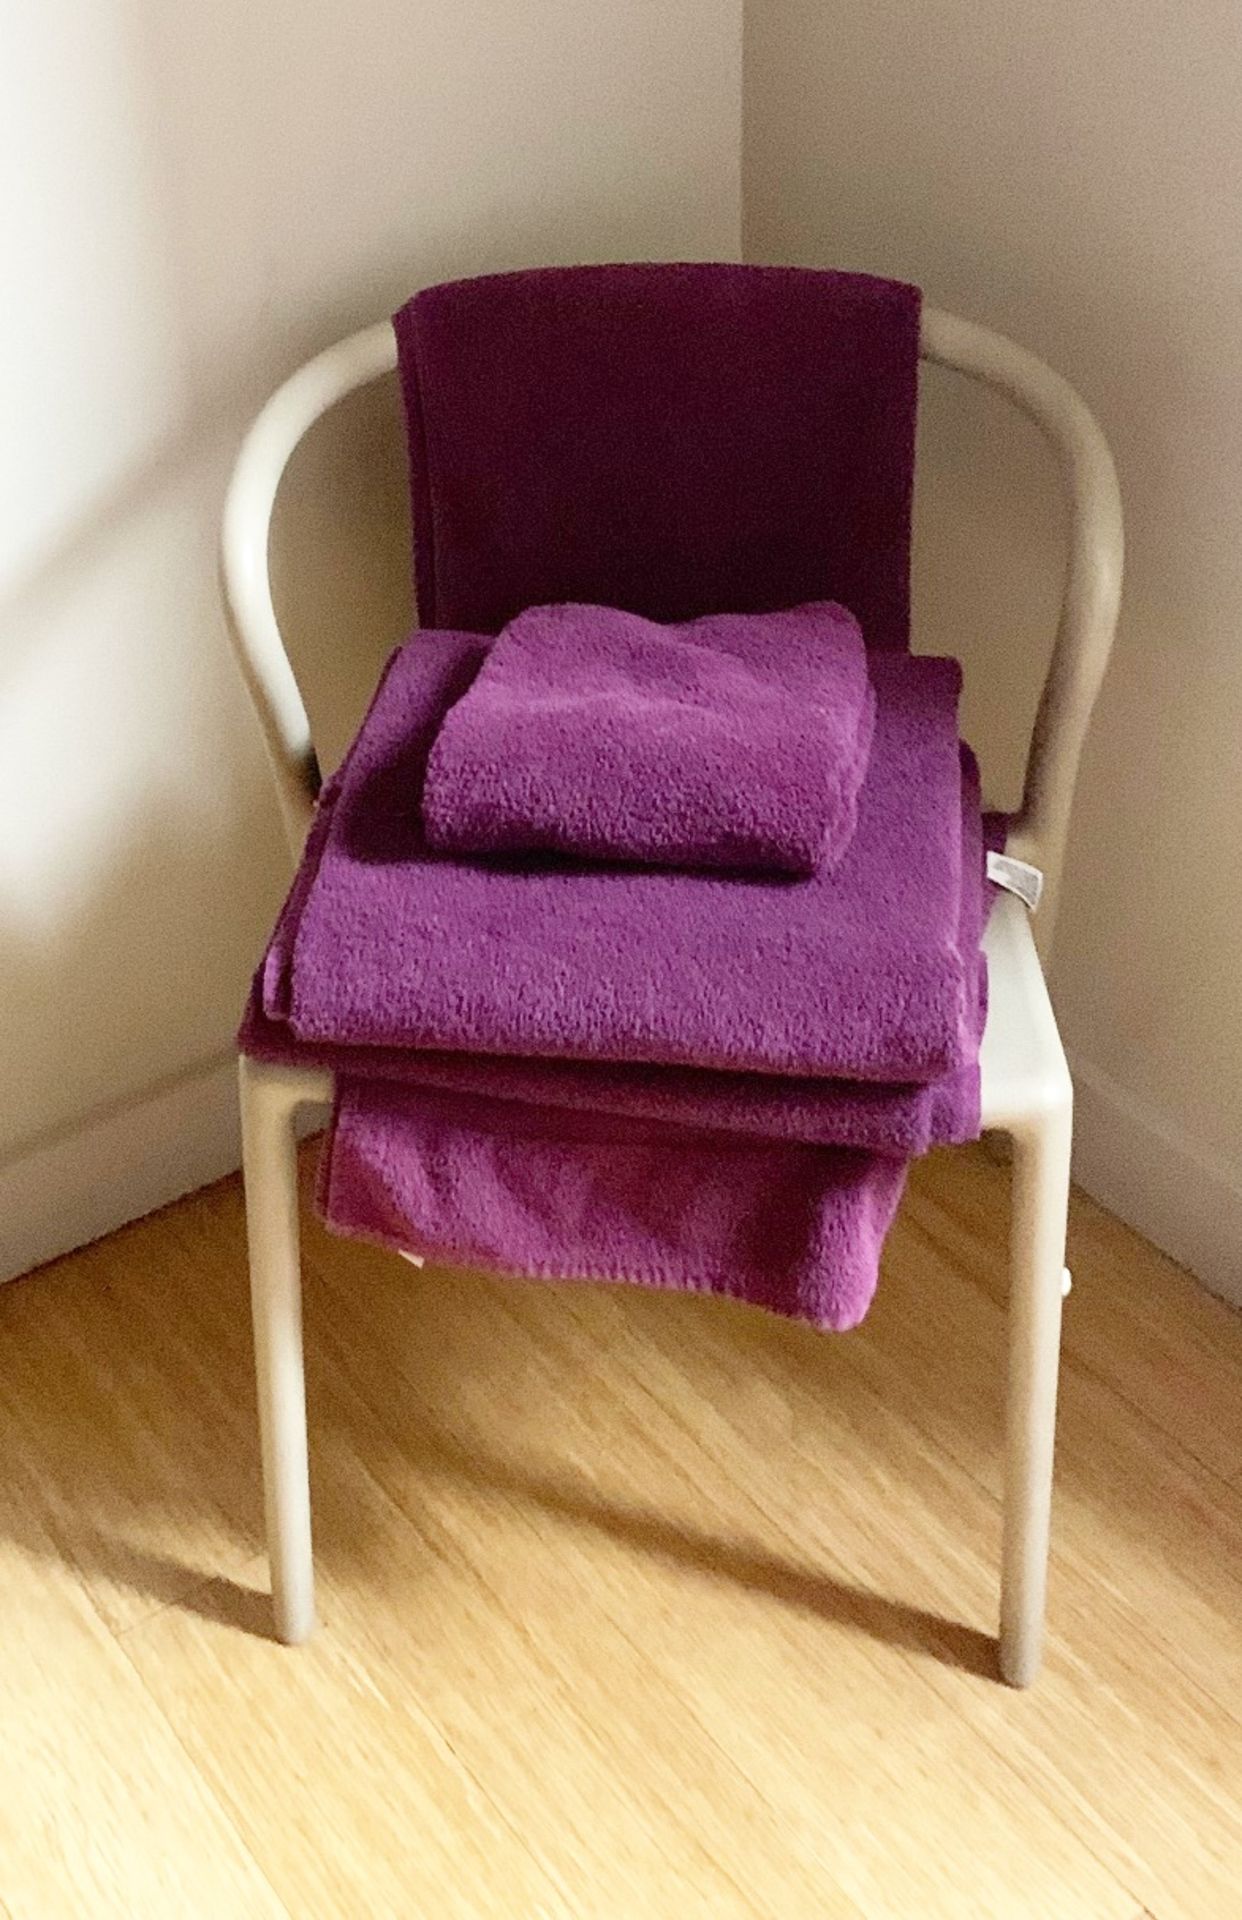 40 x Majestic Luxury 620gsm Bath Towels in Purple - Size SMALL - RRP £240 - CL587 - Location: London - Image 4 of 4